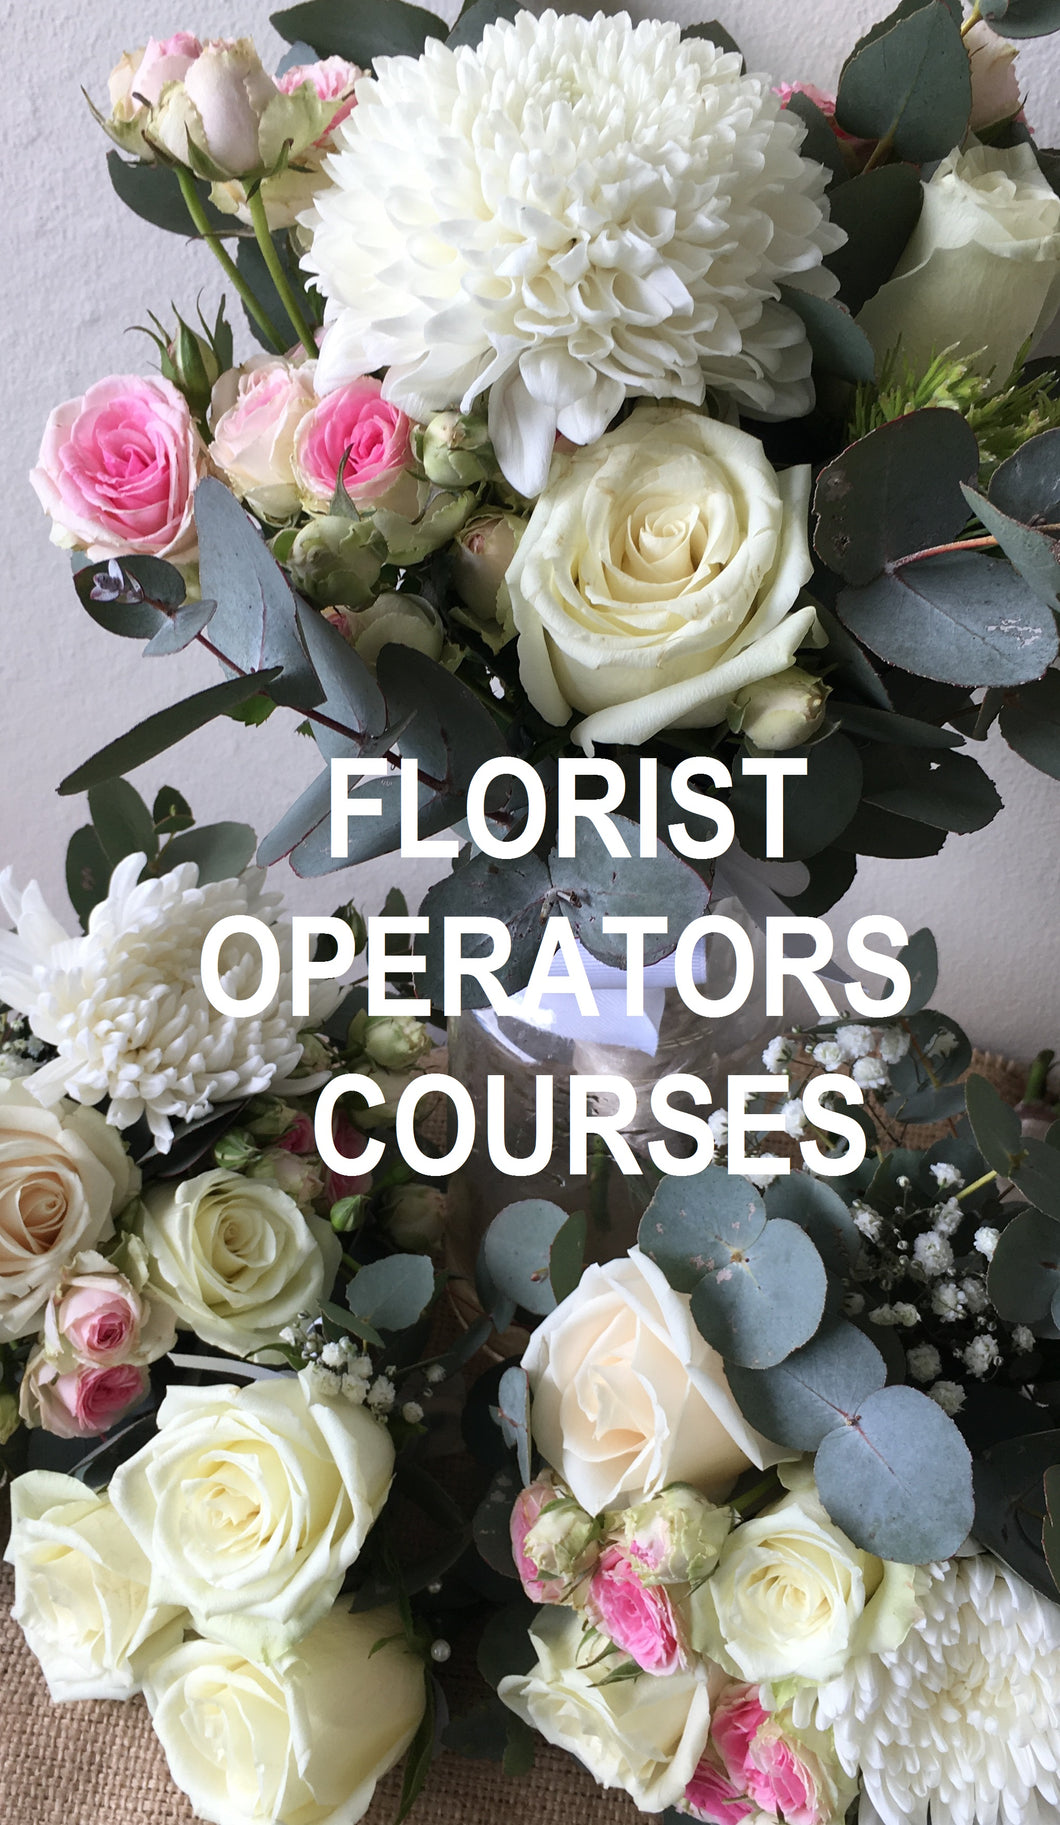 FLORIST OWNERS COURSES, THE BUSINESS OF FLORISTY COURSES, BUSINESS OWNER FLORIST COURSES, OWNER OPERATOR COURSES FOR FLORISTS, LEARN TO BE A FLORIST OWNER